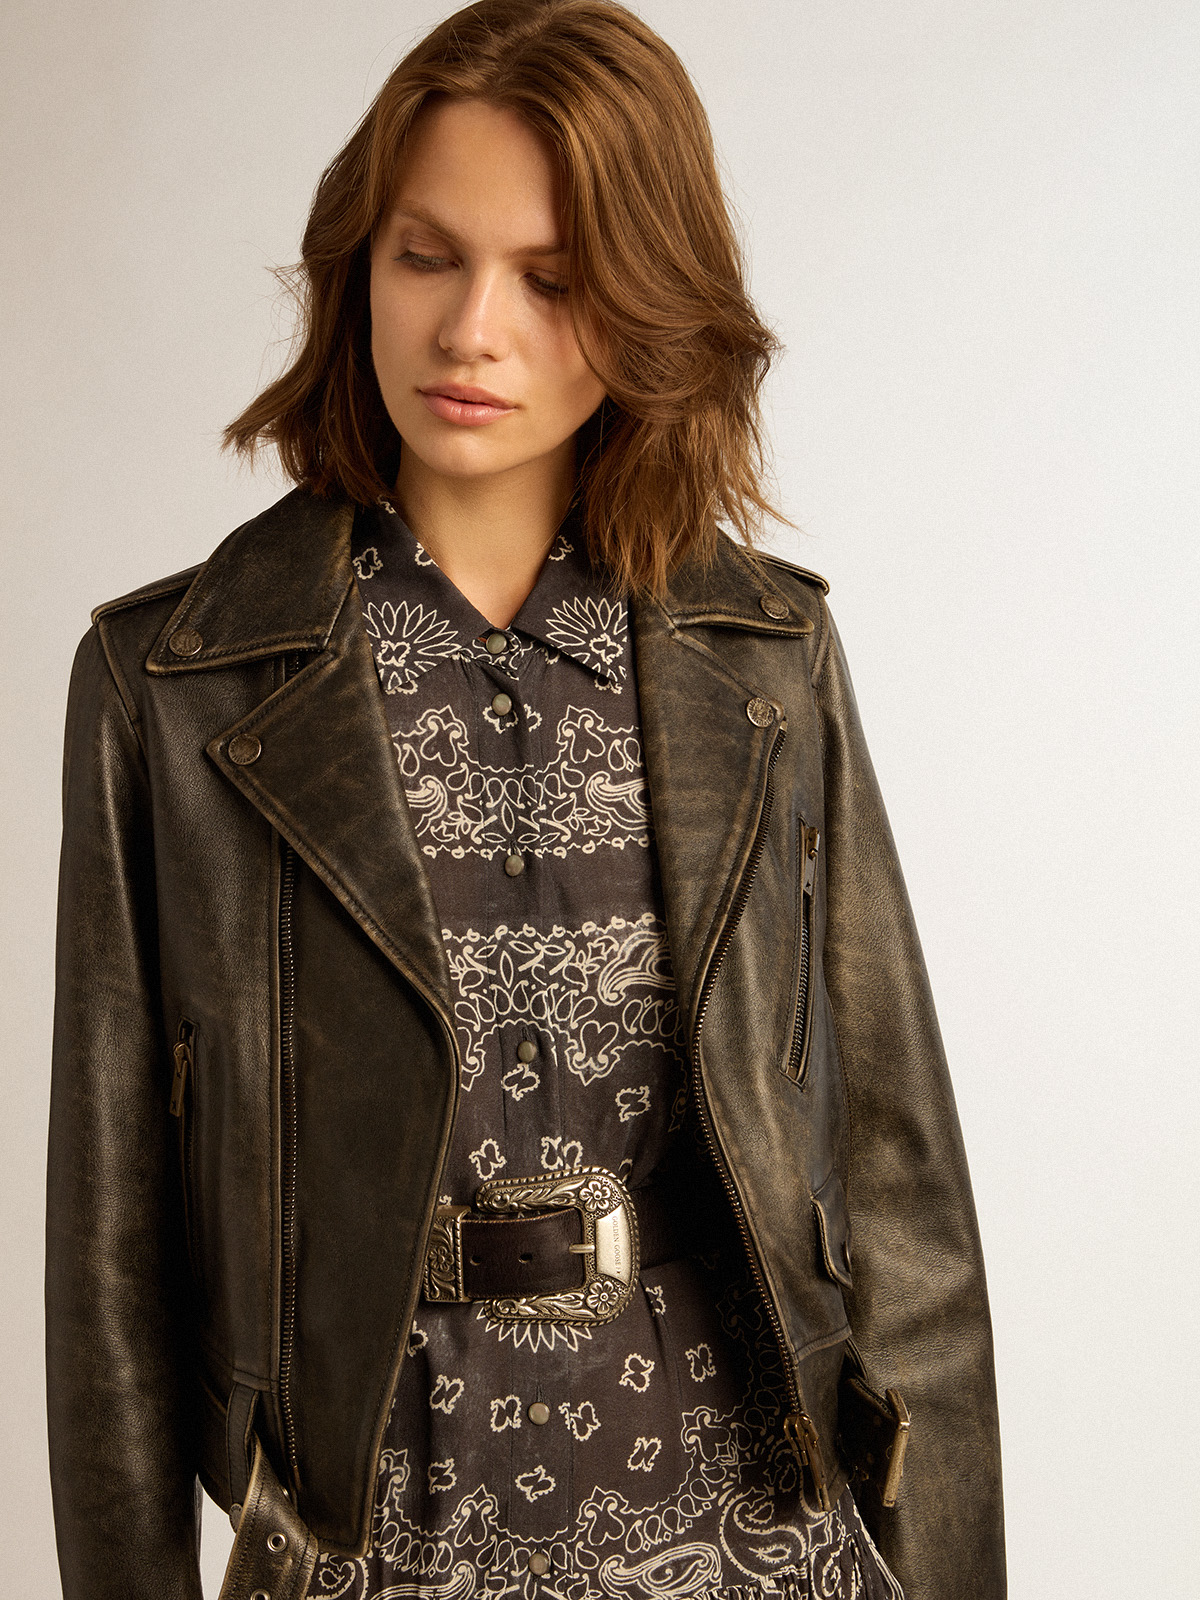 Looking for Womens Black Leather Biker Jacket With Back Print?